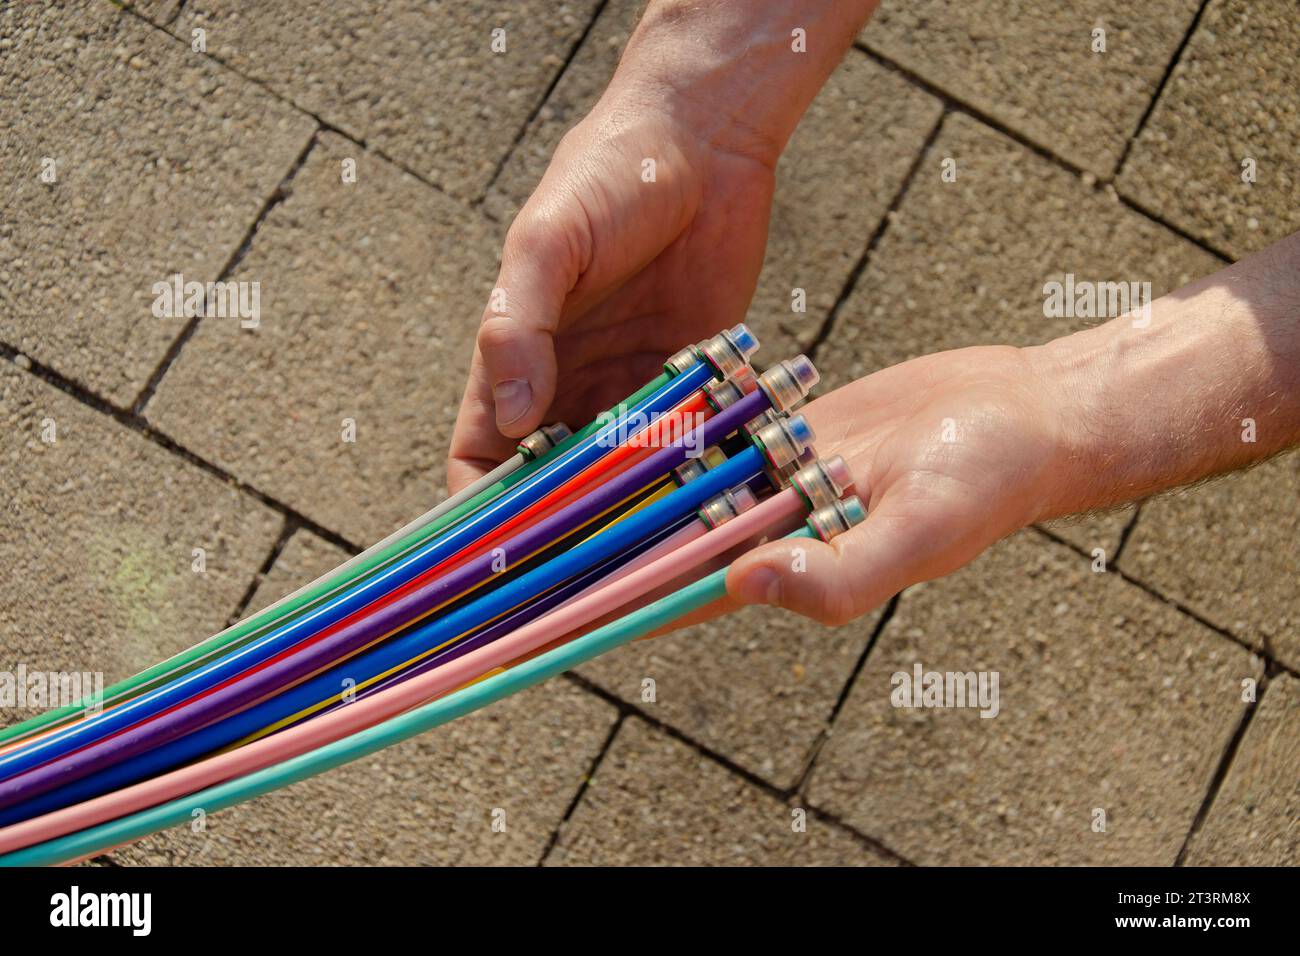 Fibre optic cable in the hands of a man against the background of paving slabs. Stock Photo